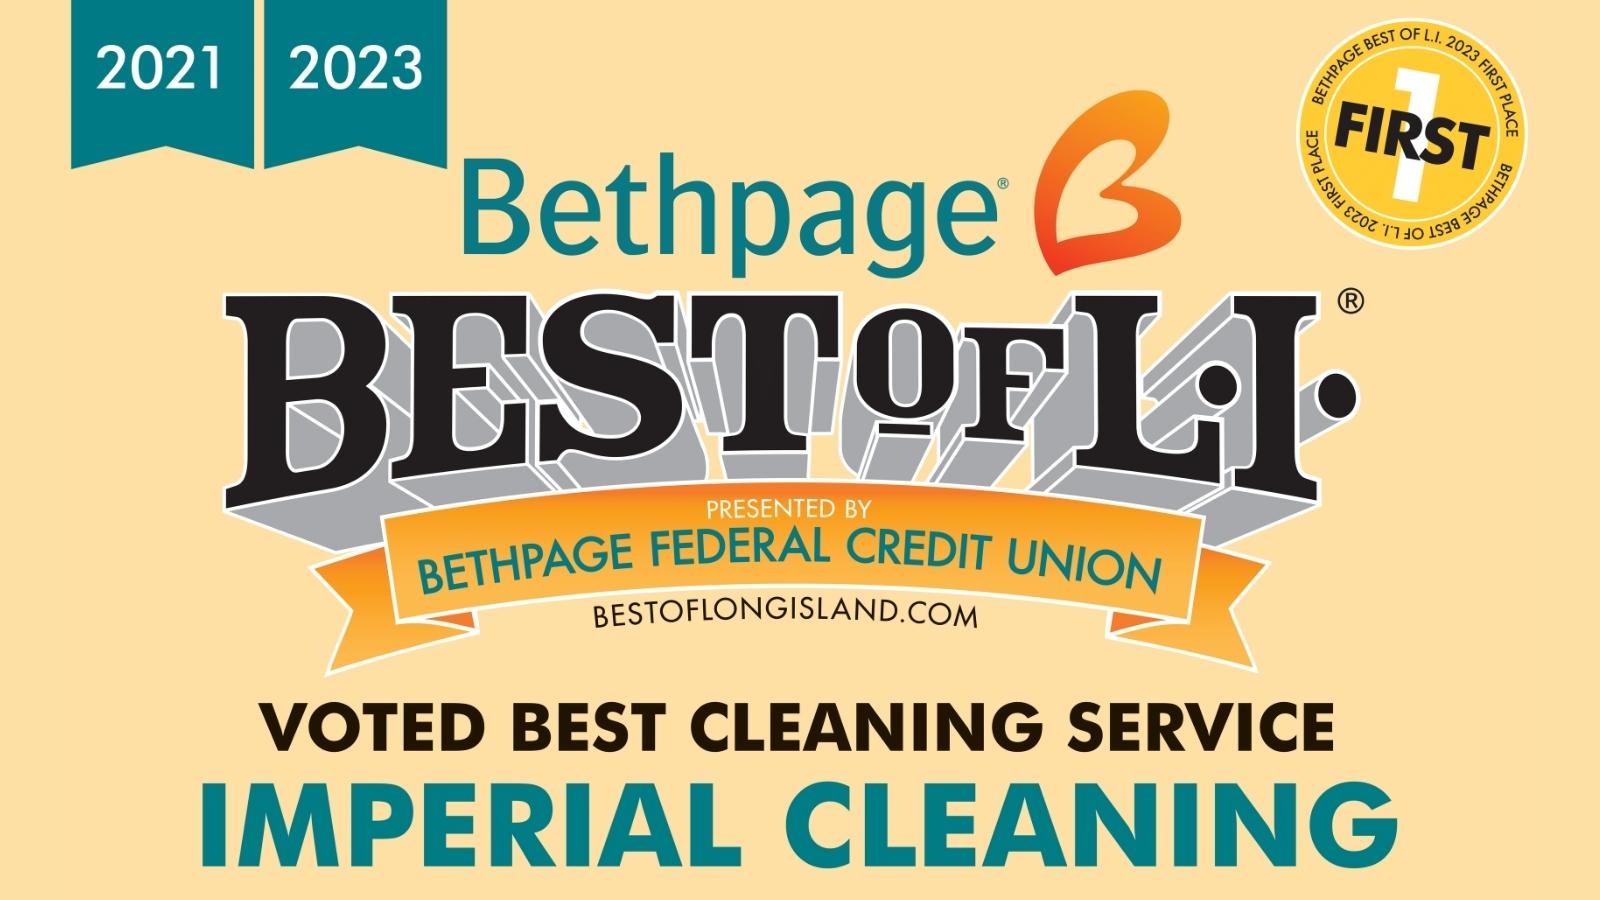 Imperial Cleaning won the Best of Long Island: Best Cleaning Service